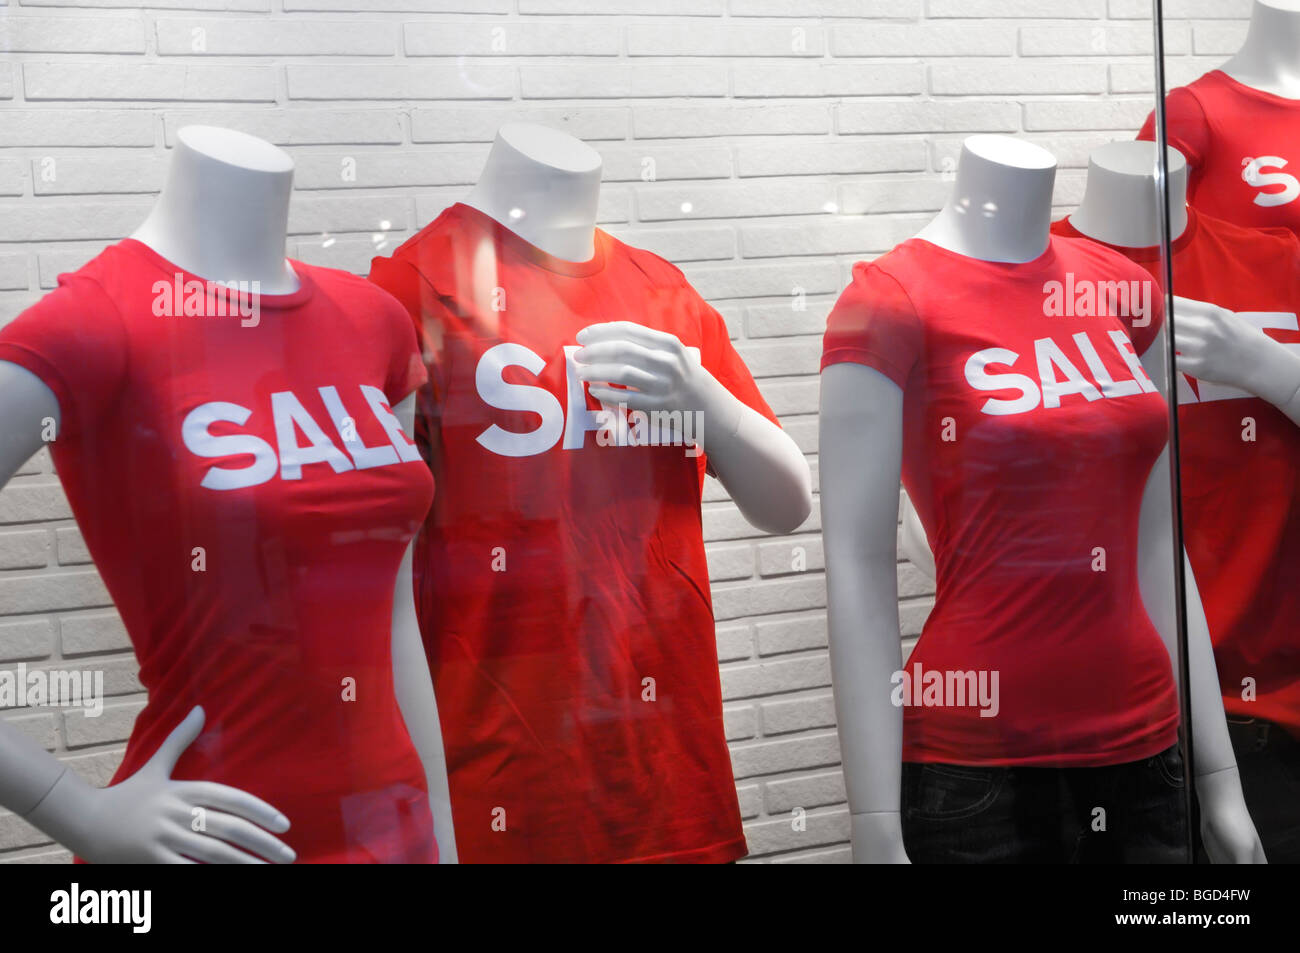 Mannequins behind glass with a sale sign on their red T-shirts. Stock Photo